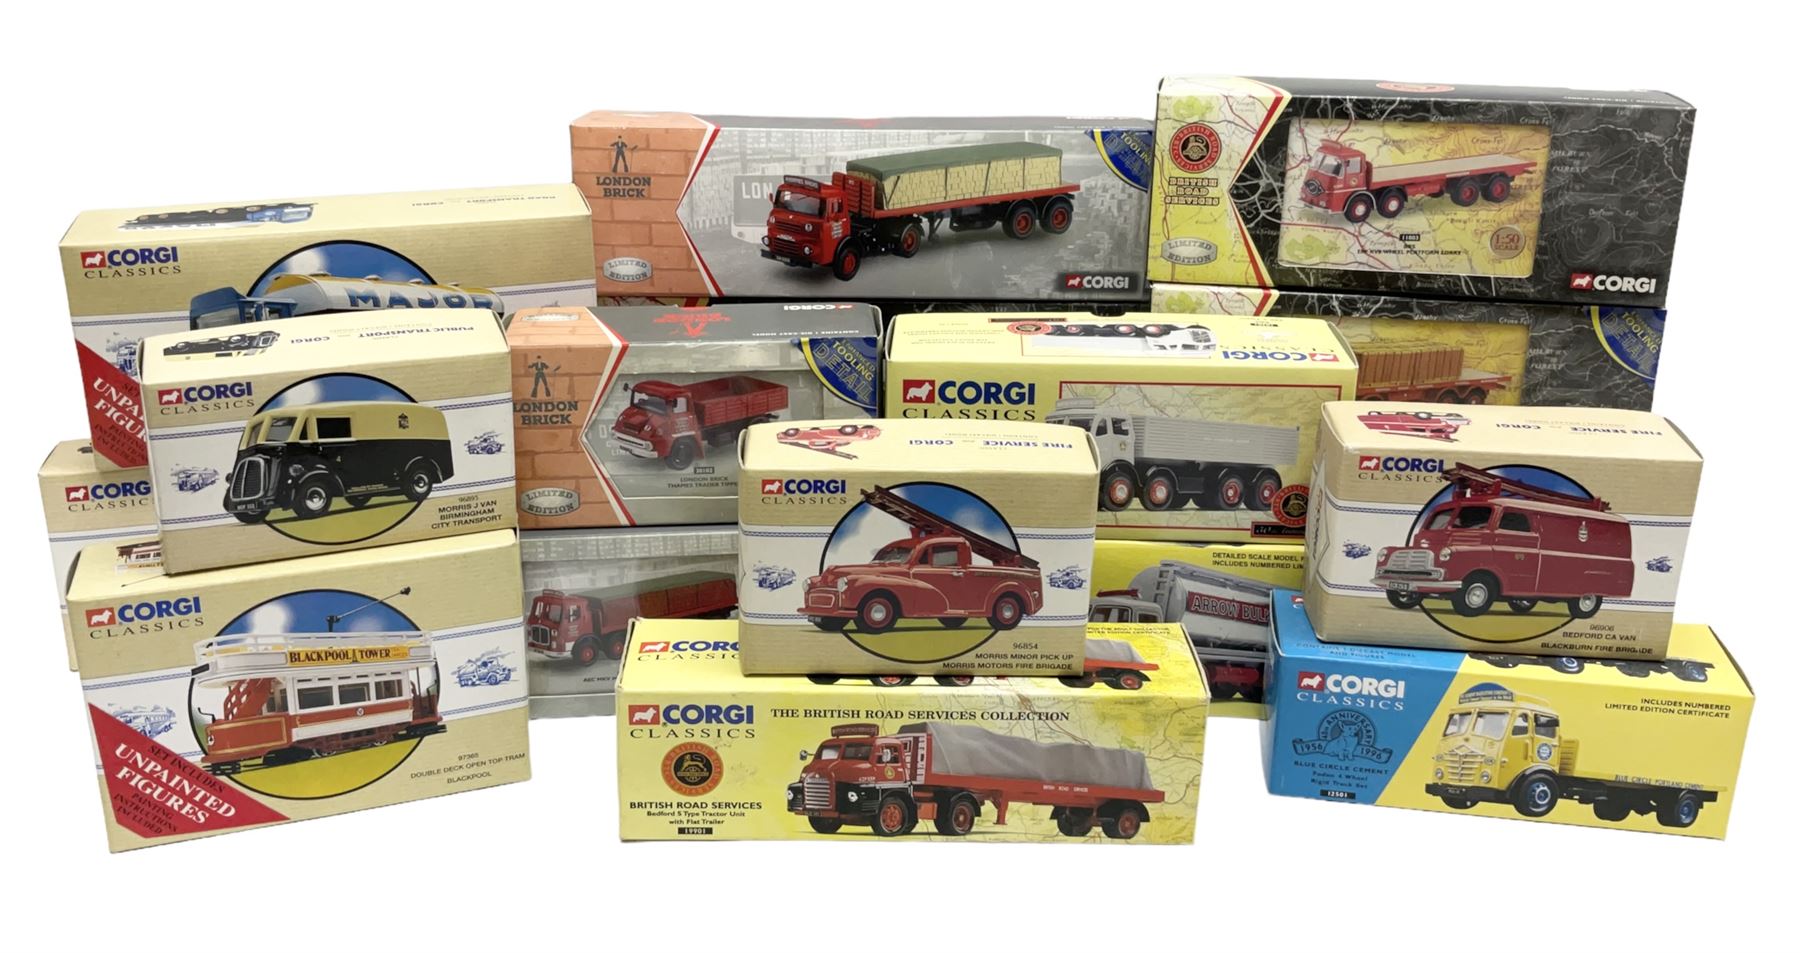 Collection of Corgi die-cast models including British Road Services